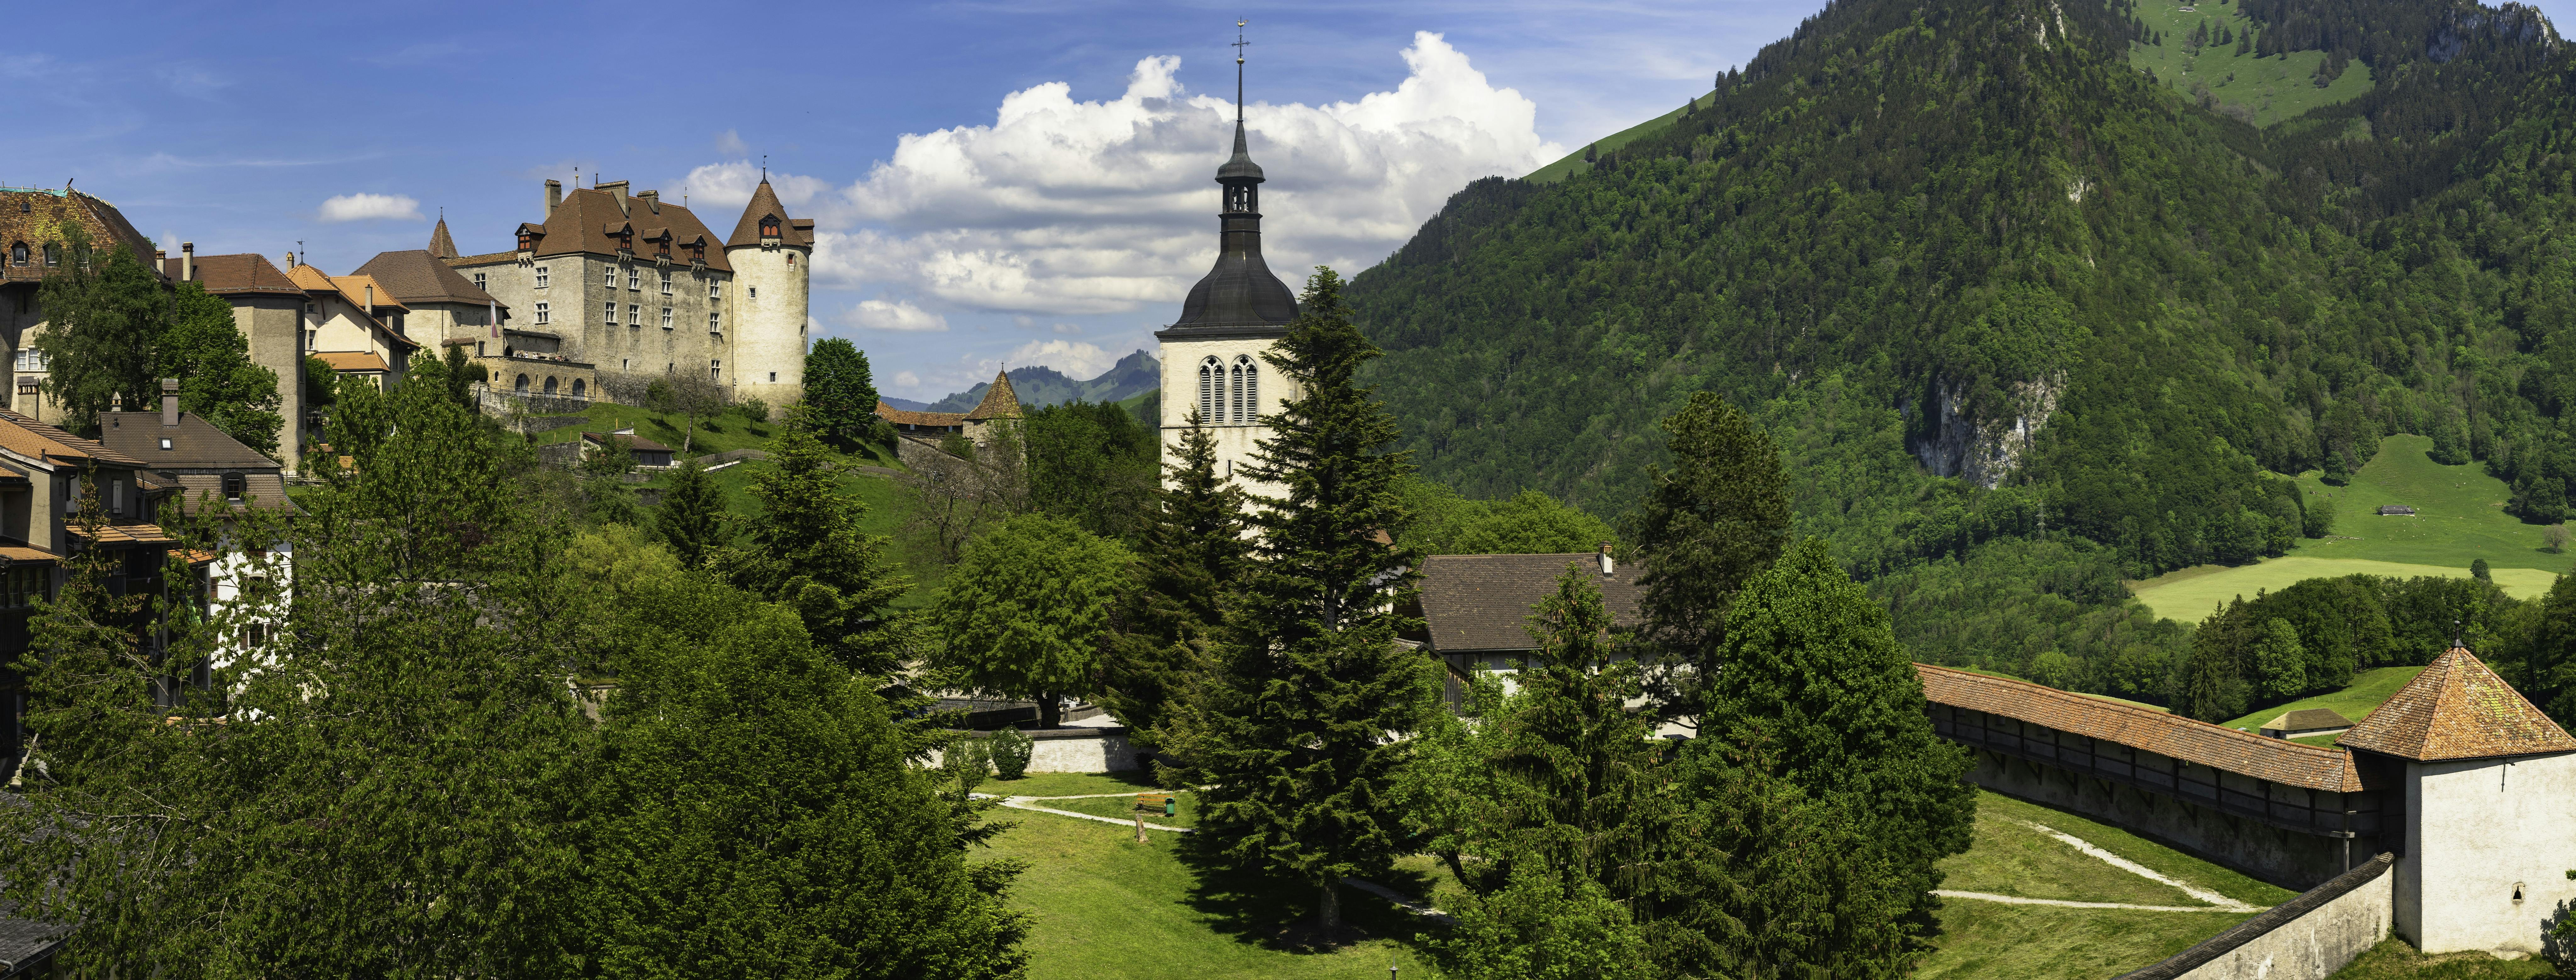 Gruyères chocolate and cheese tour from Lausanne with Golden Pass train ride Musement